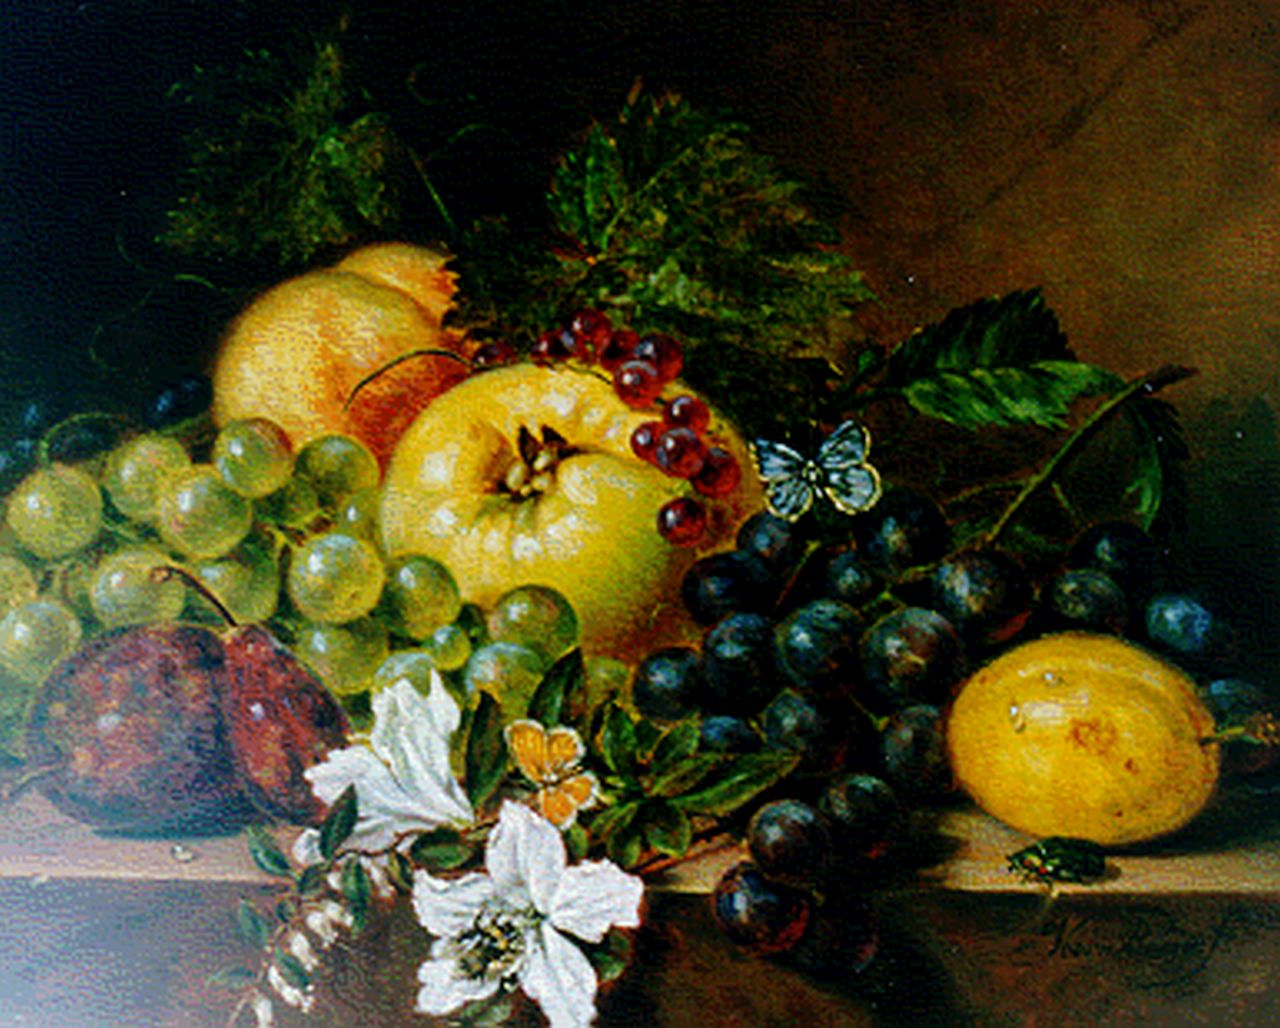 Voorn Boers S.T.  | Sebastiaan Theodorus Voorn Boers, A still life with grapes, prunes, flowers and a butterfly, Öl auf Holz 23,6 x 30,0 cm, signed l.r.